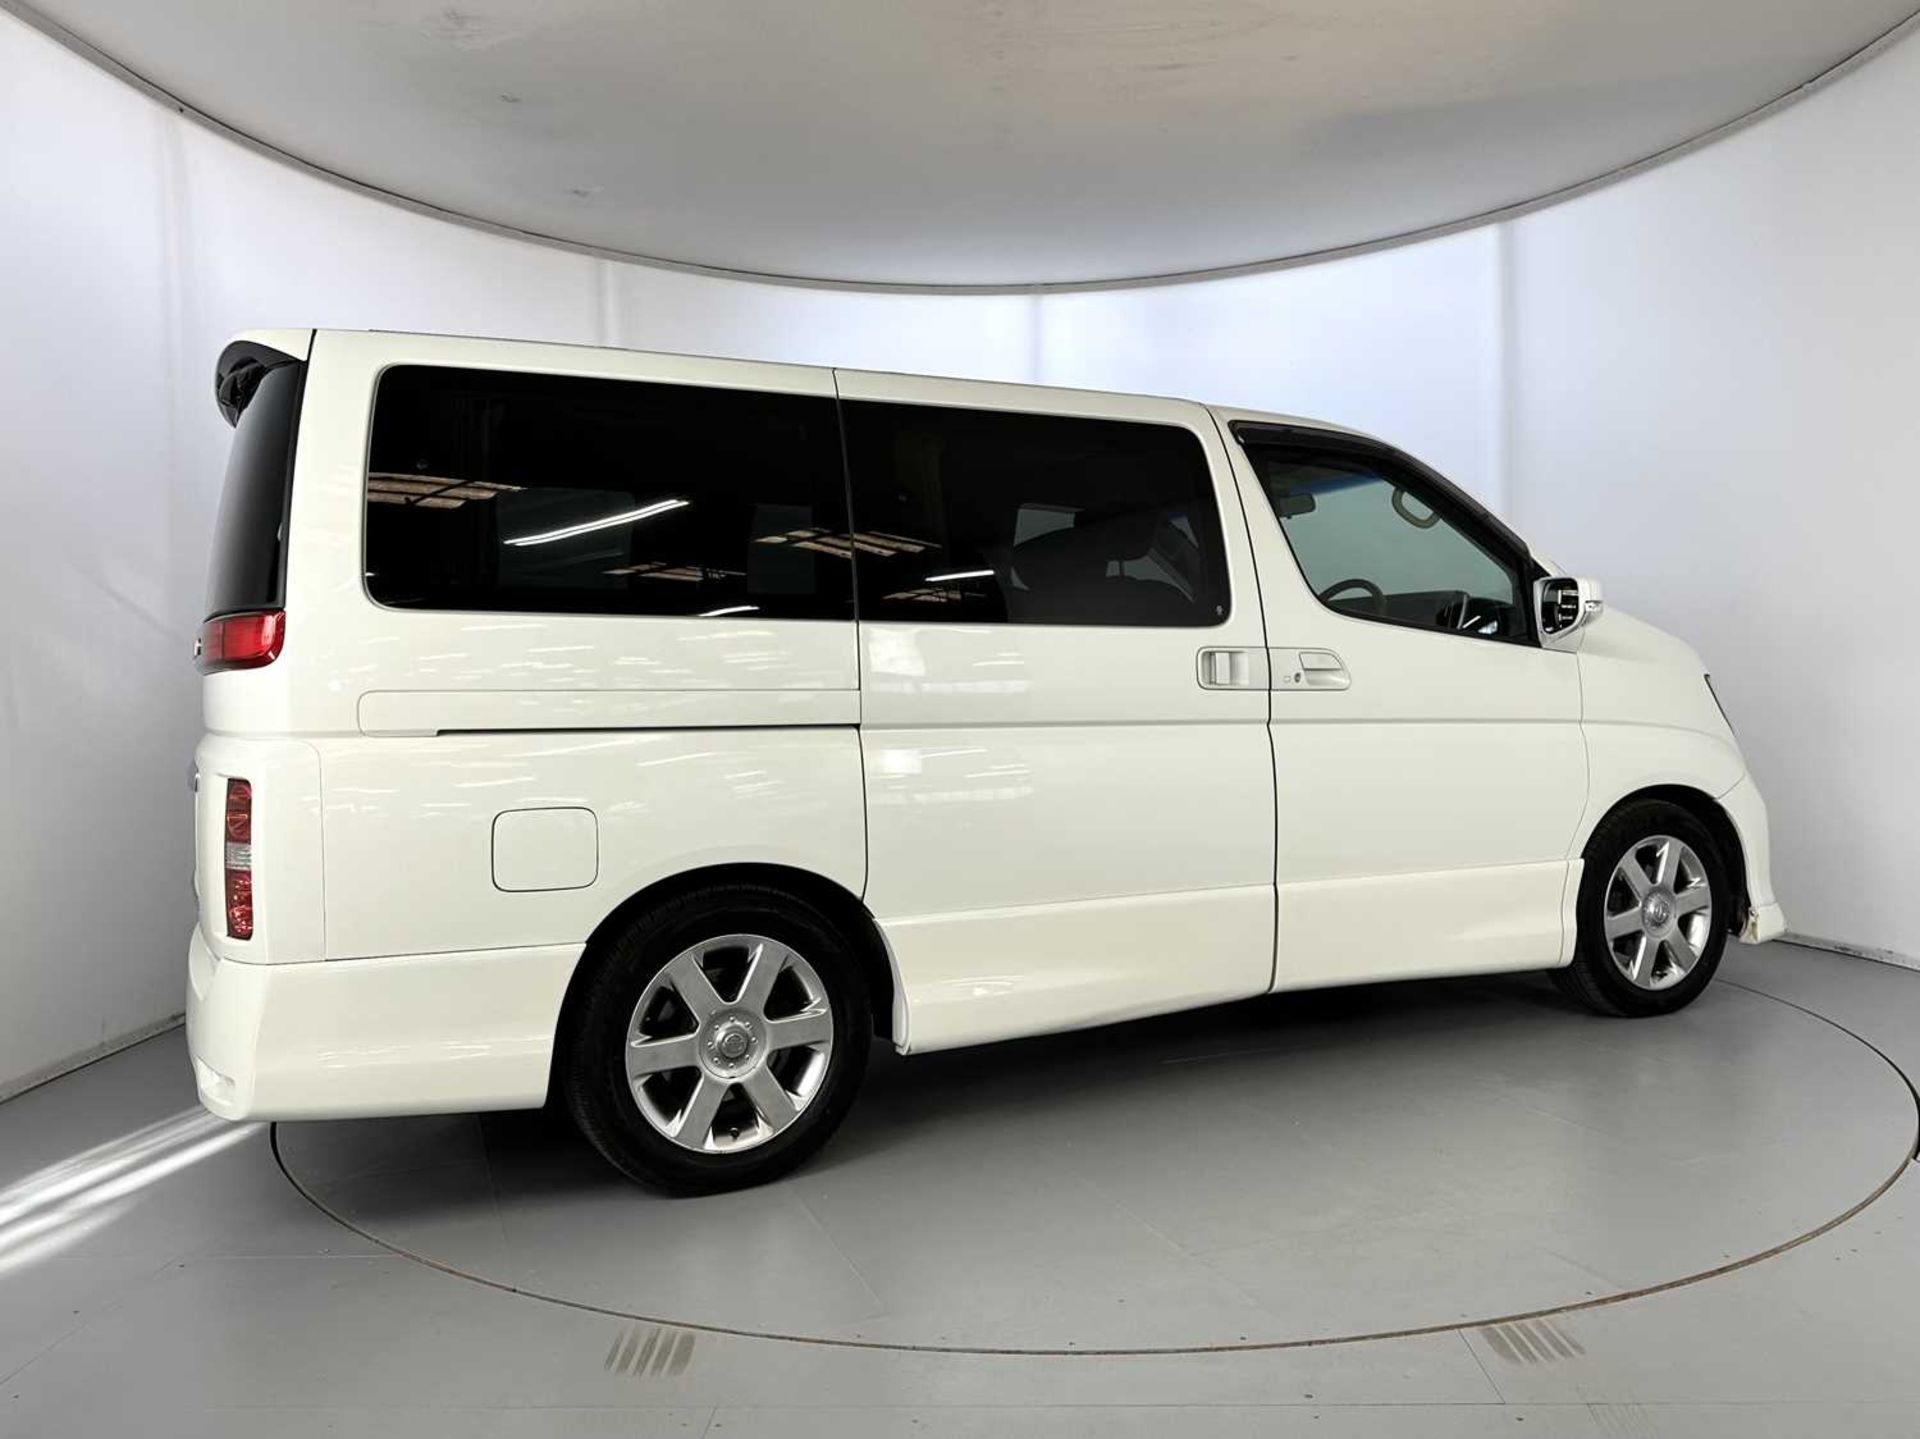 2007 Nissan Elgrand - Highway Star Edition 4WD - Image 10 of 39